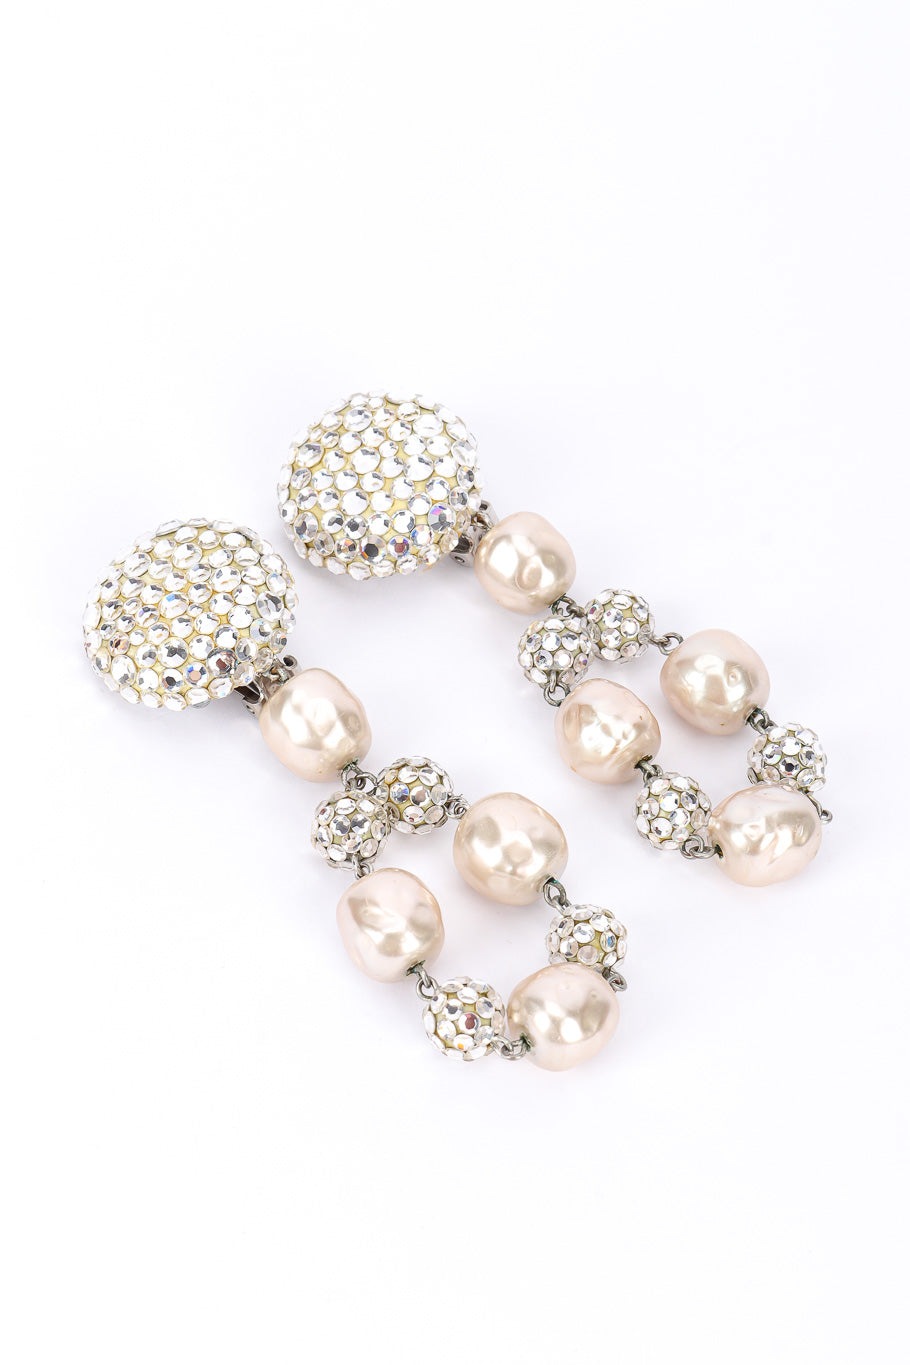 Pearl drop earrings by James Arpad on white background diagonal @recessla